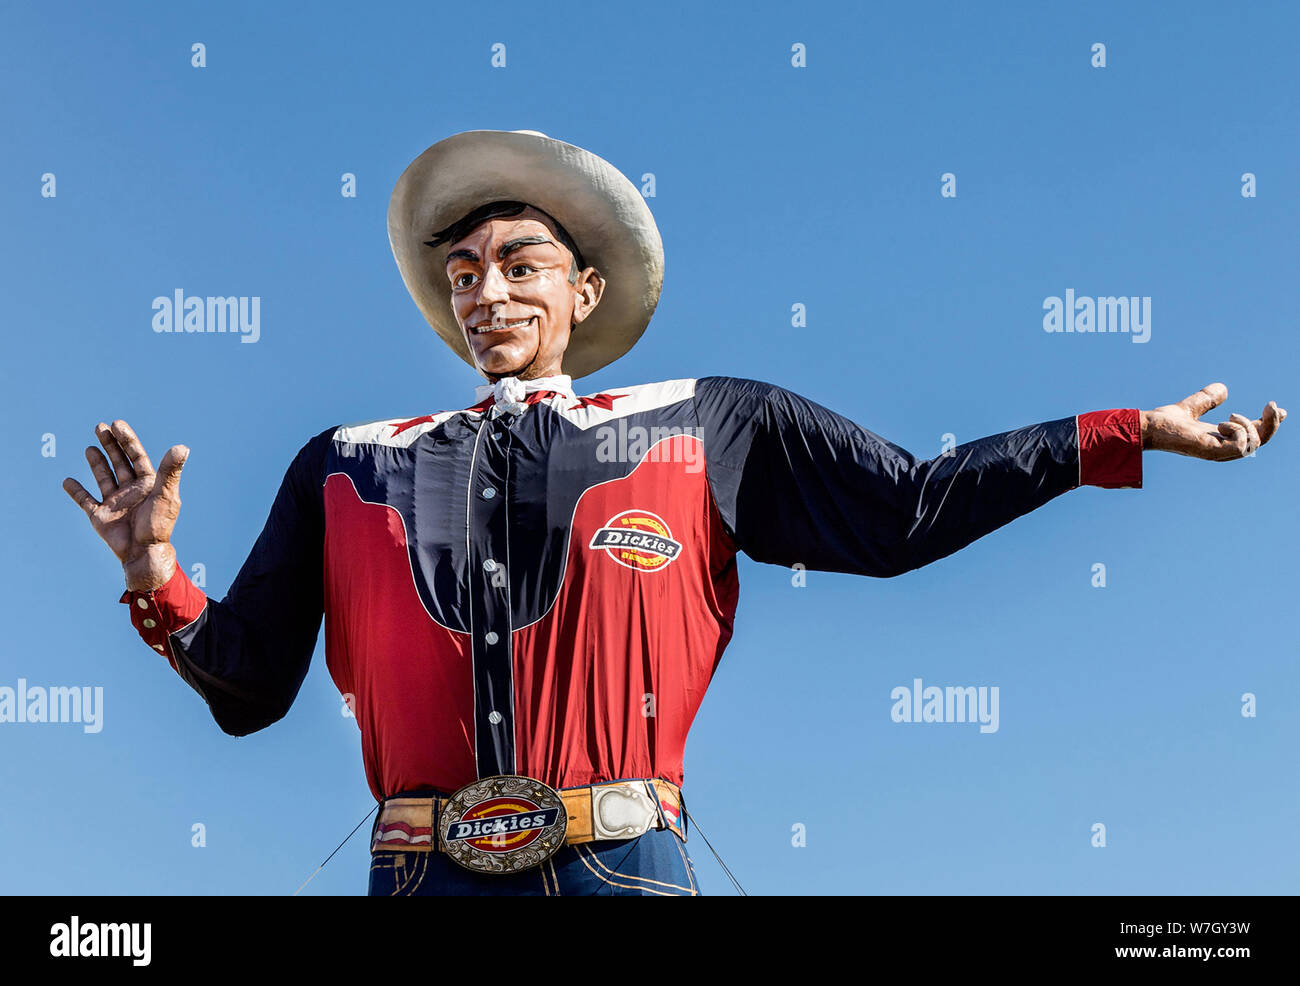 Big Tex is a 55-foot tall statue and marketing icon of the annual State Fair of Texas held at Fair Park in Dallas, Texas Stock Photo